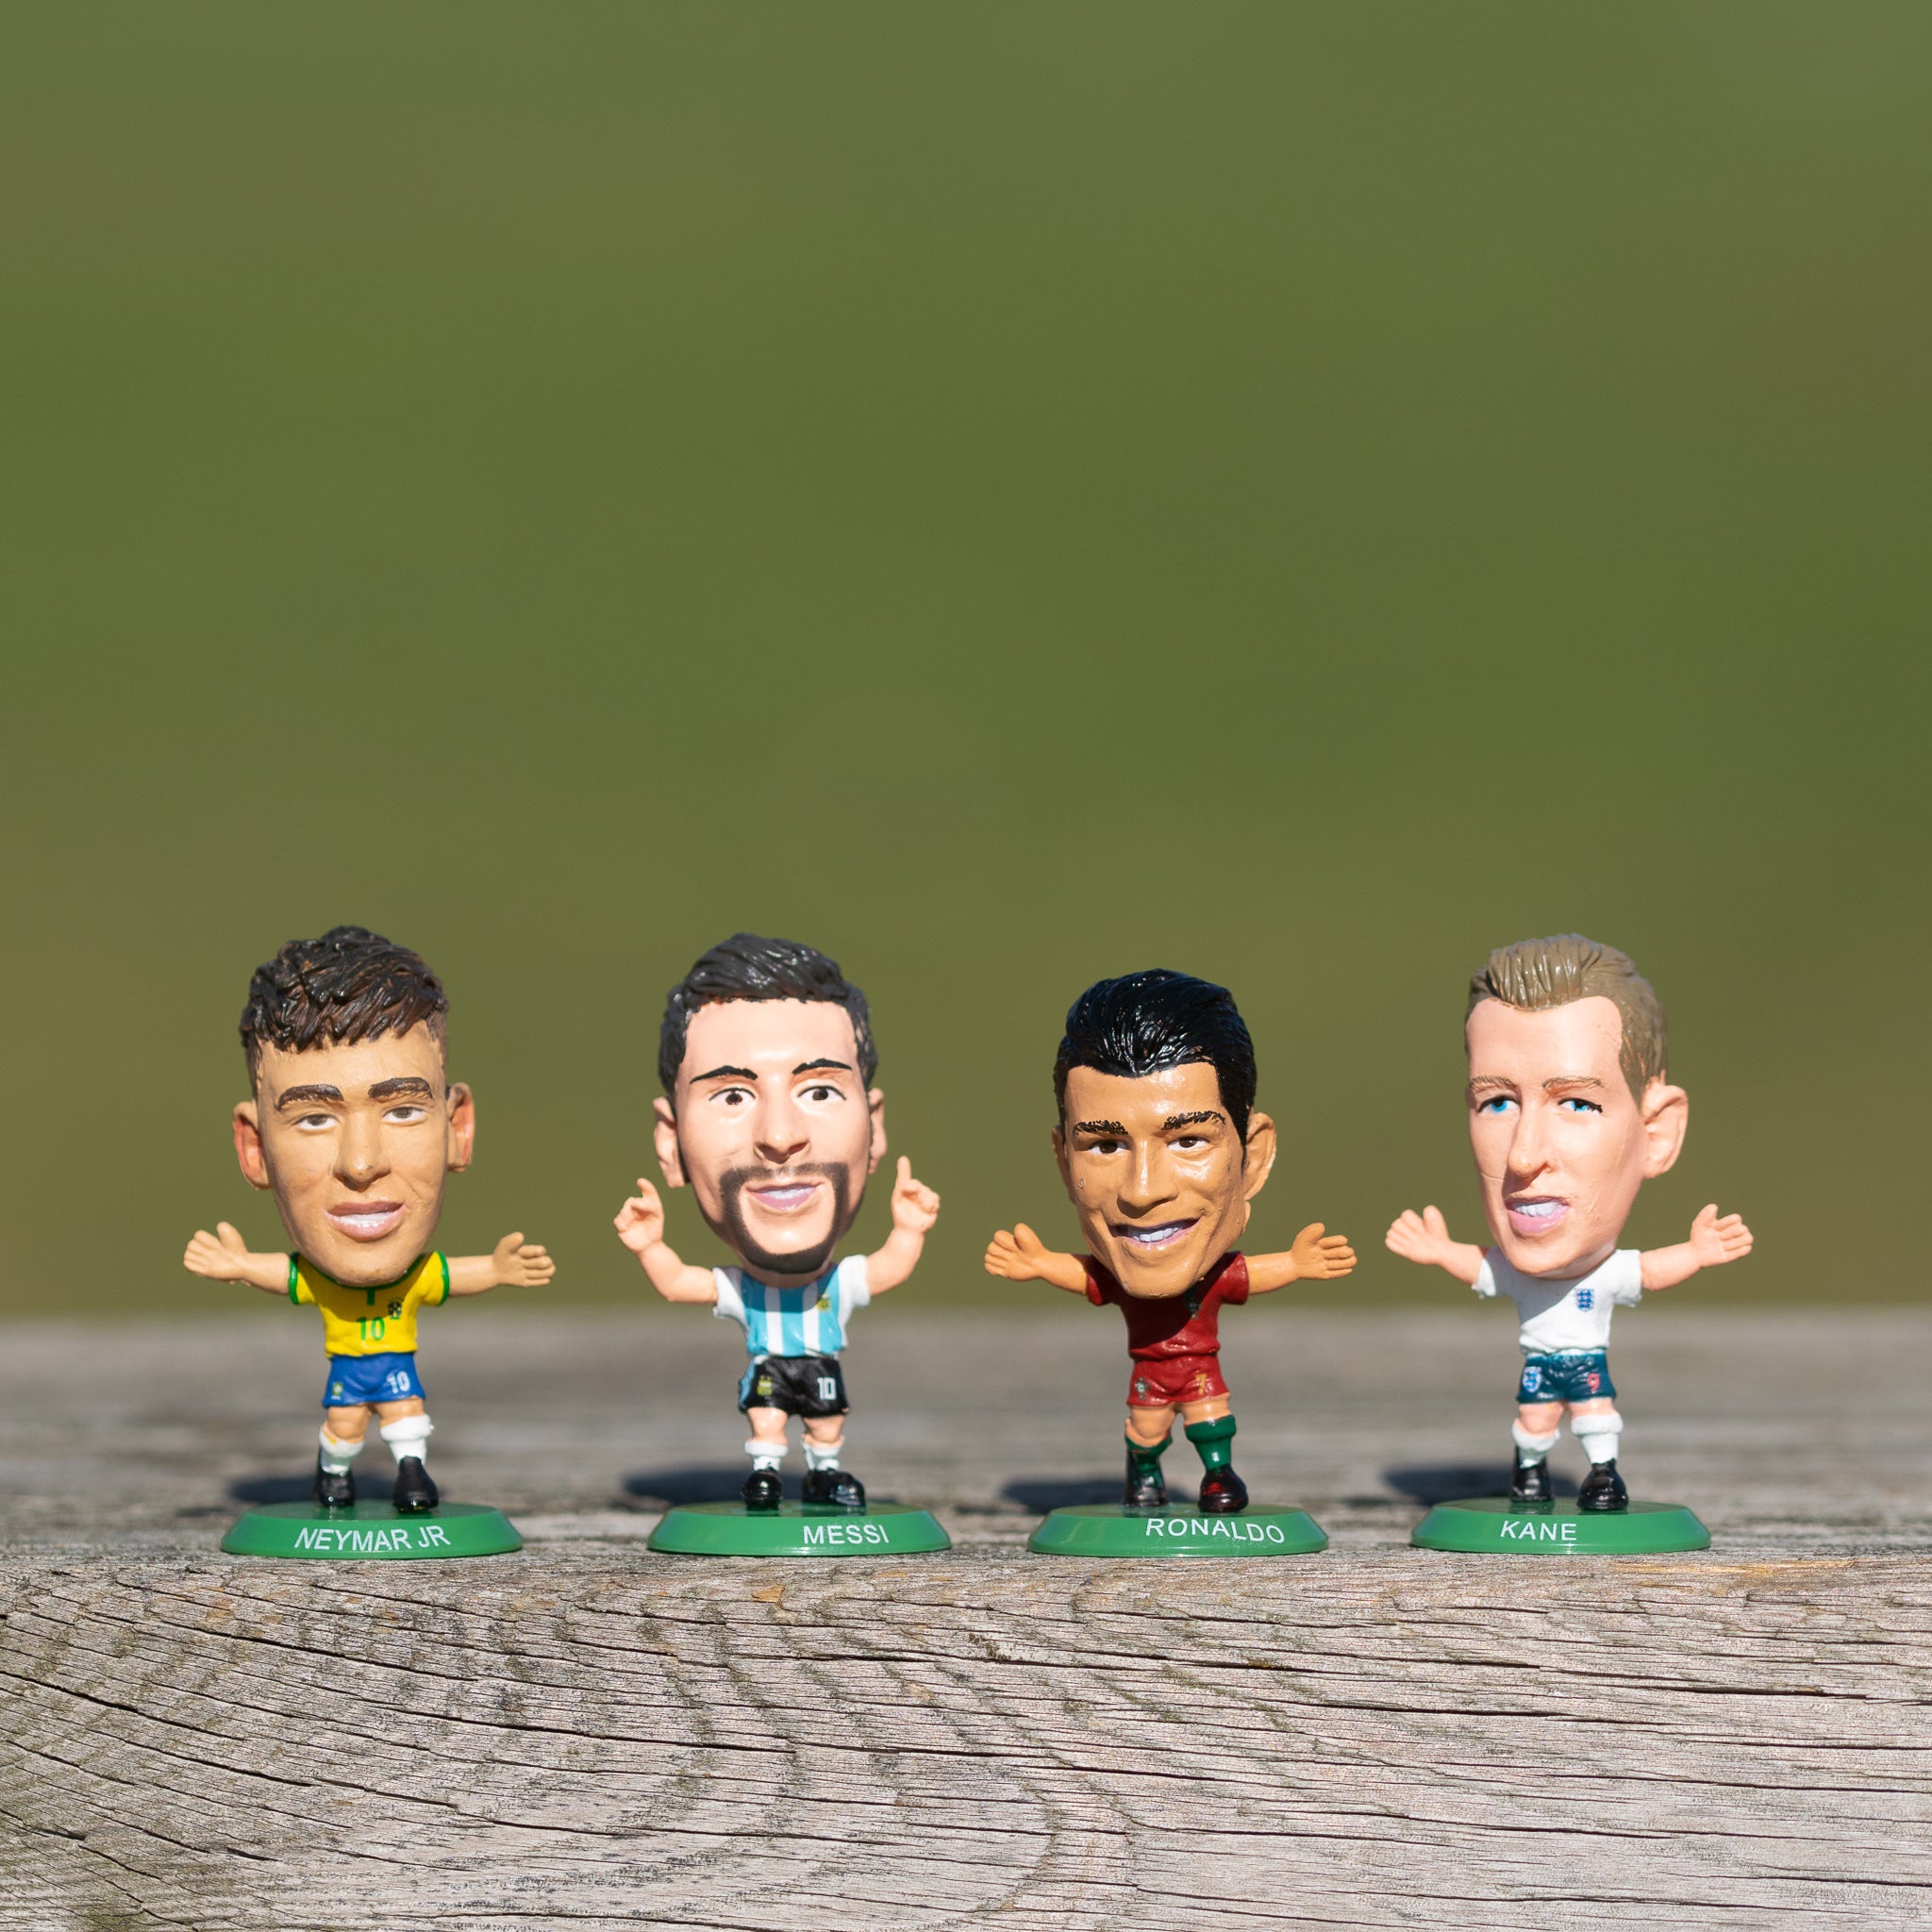 SoccerStarz By Country – Tagged Brazil – SoccerCards.ca